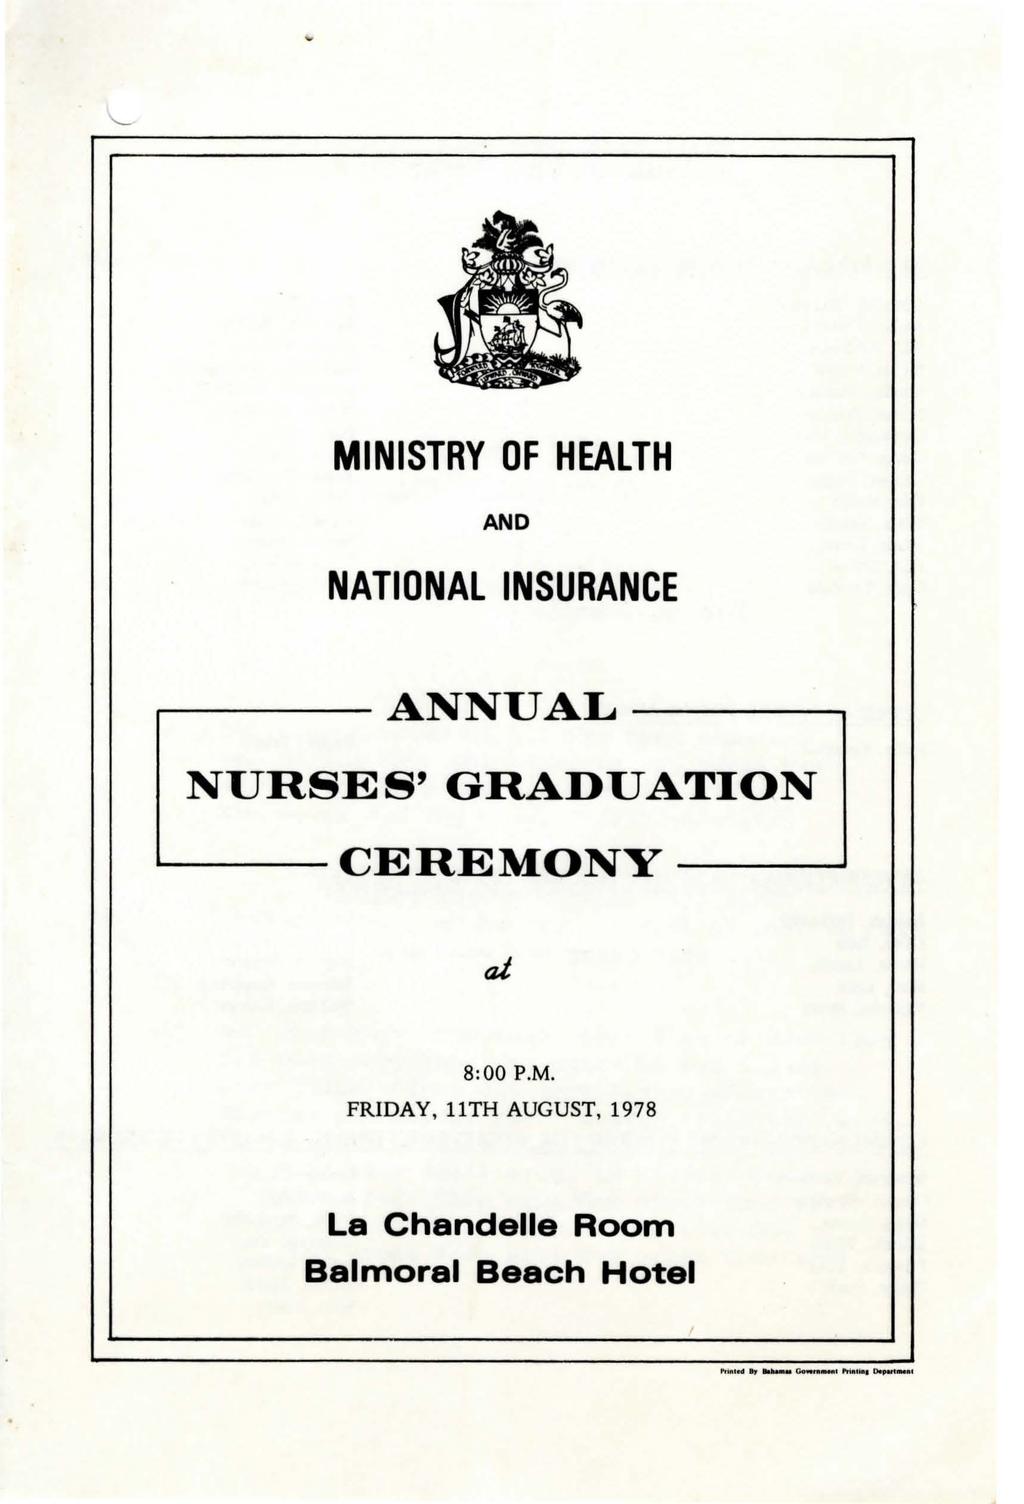 MINISTRY OF HEALTH AND NATIONAL INSURANCE ----ANNUAL------. NURSES' GRADUATION.